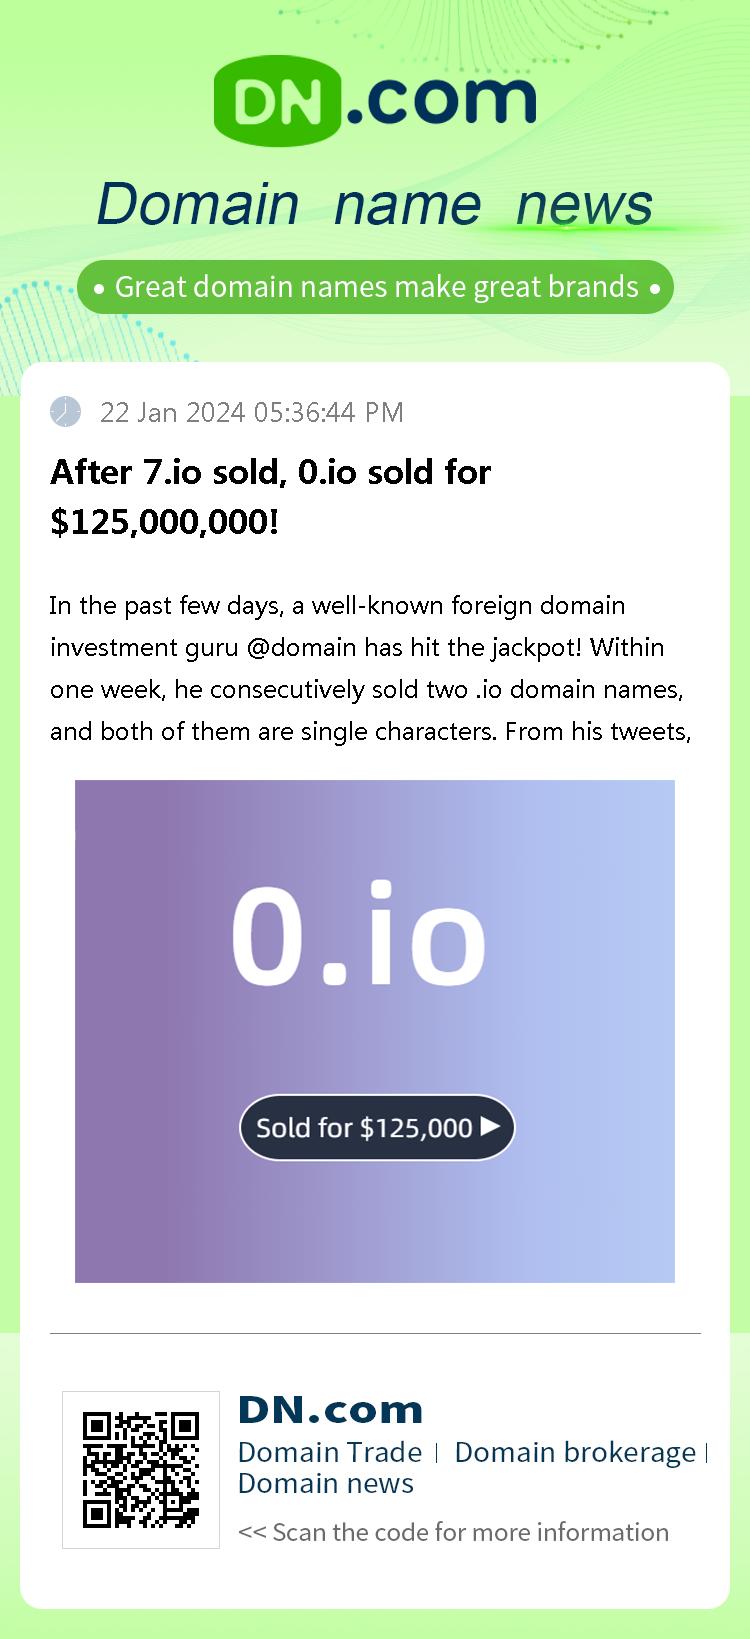 After 7.io sold, 0.io sold for $125,000,000!